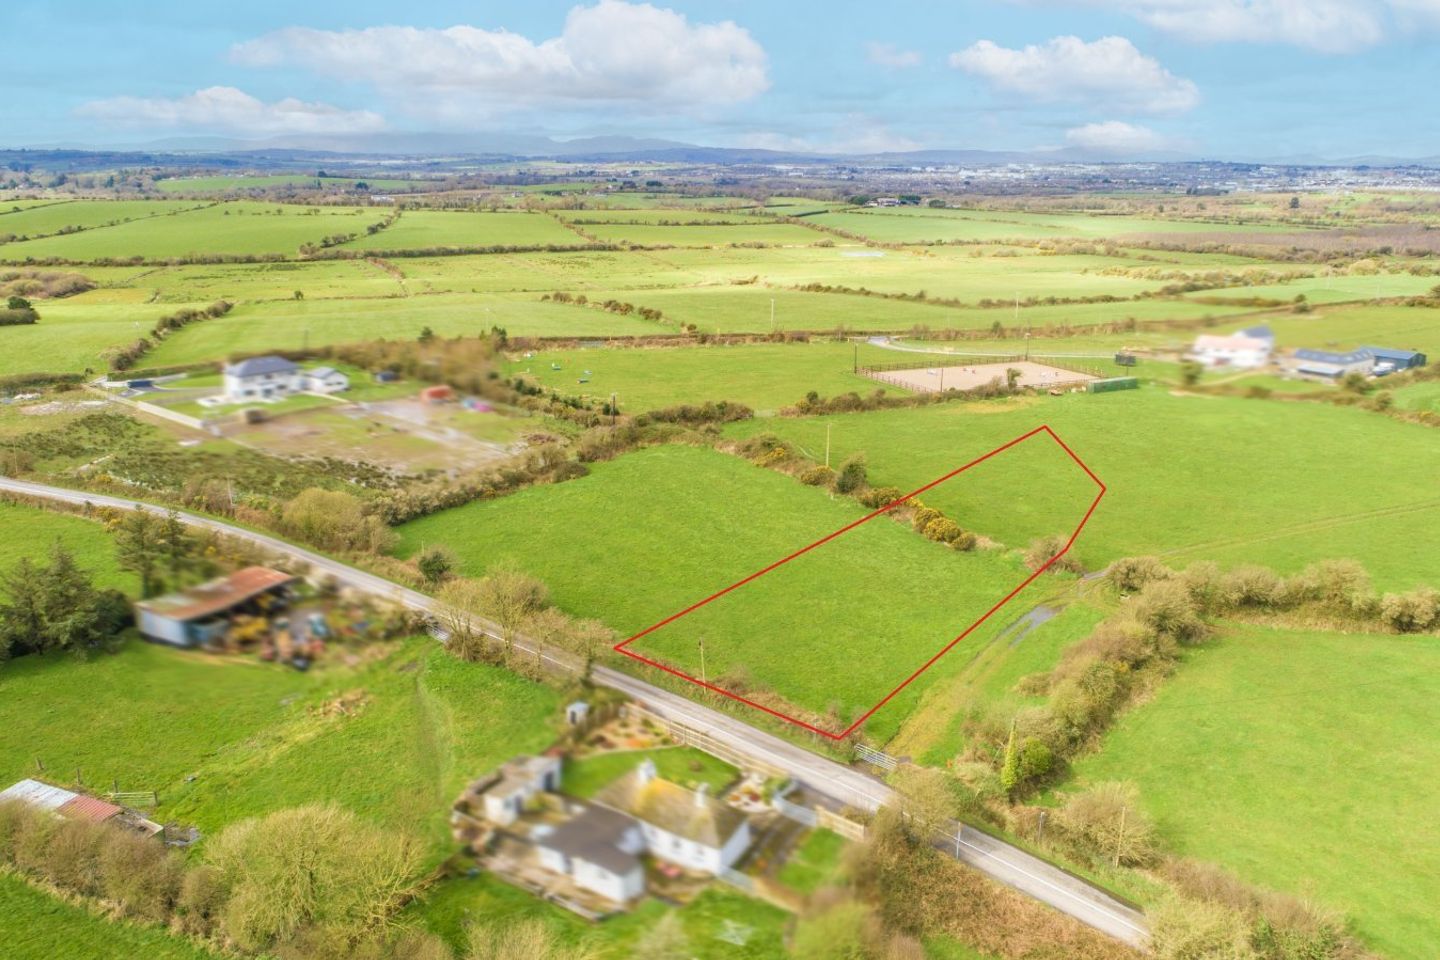 C. 0.8 Acres At Kilcaragh, Grantstown, Co. Waterford